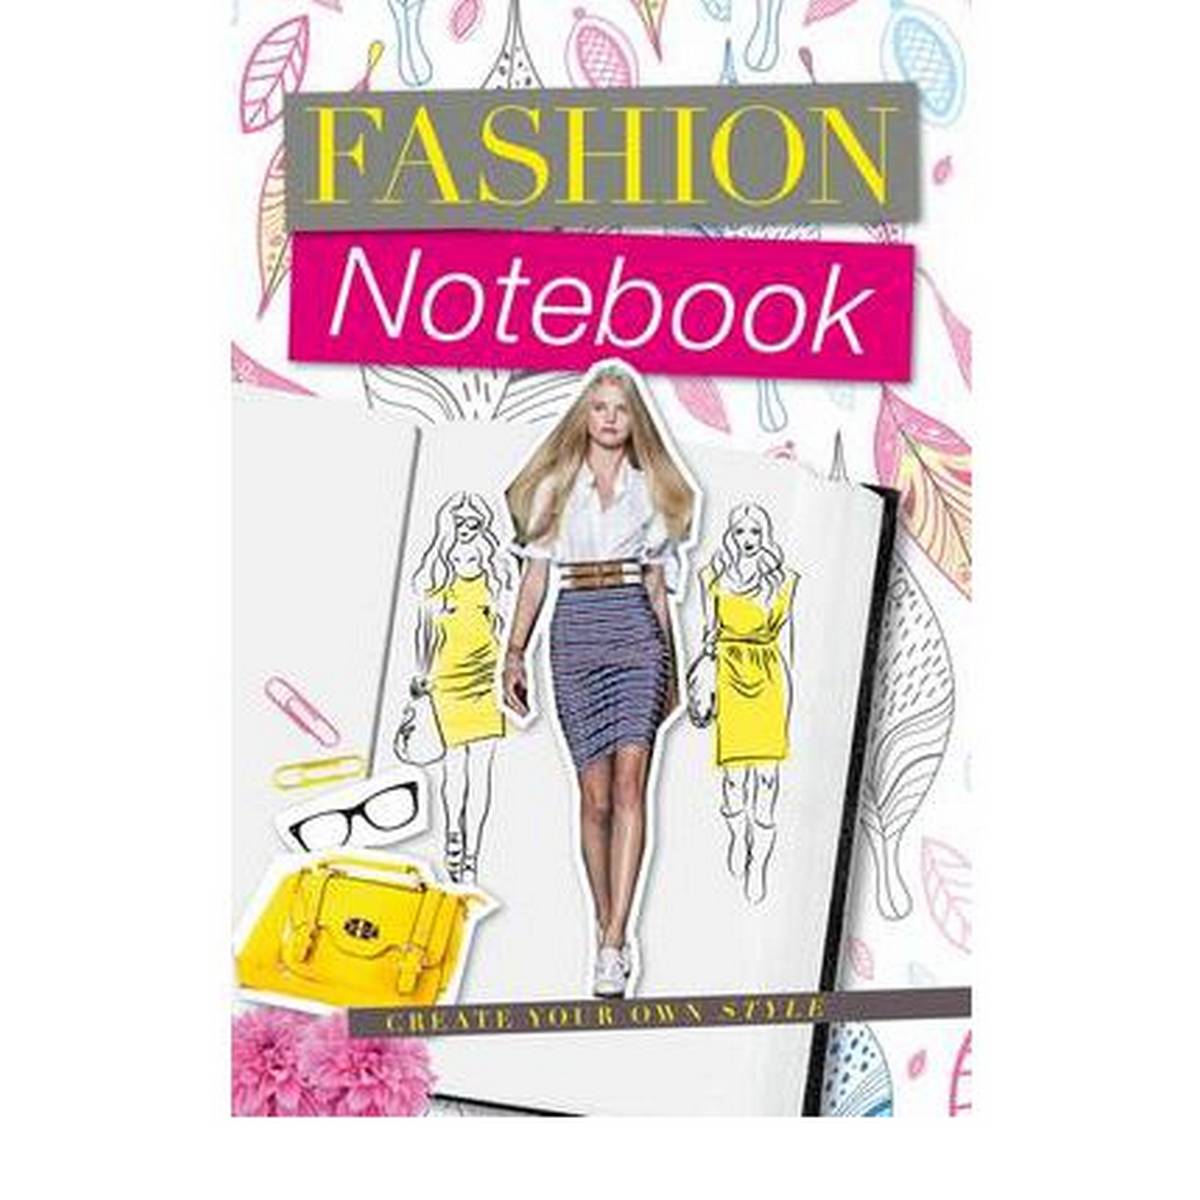 Fashion Notebook: My Notebook of Trends